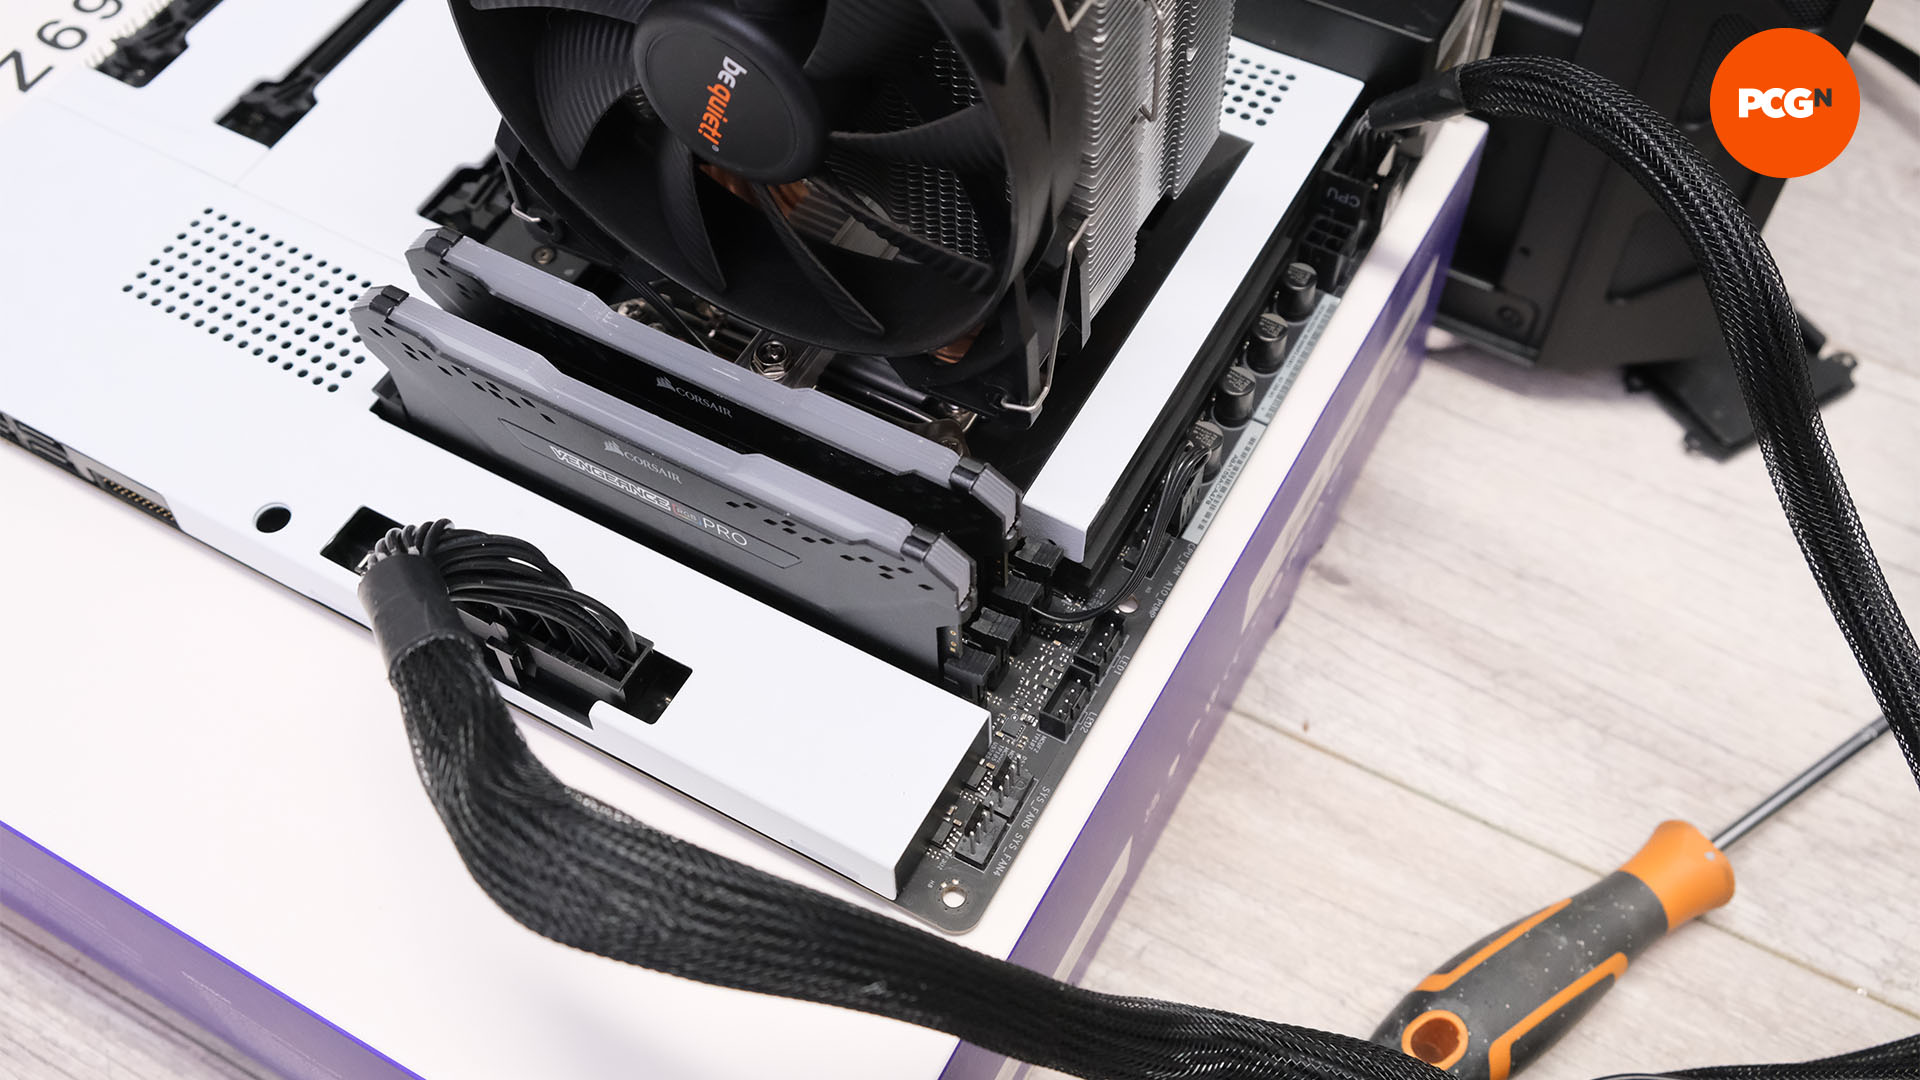 How to build a gaming PC: Connect ATX power plug